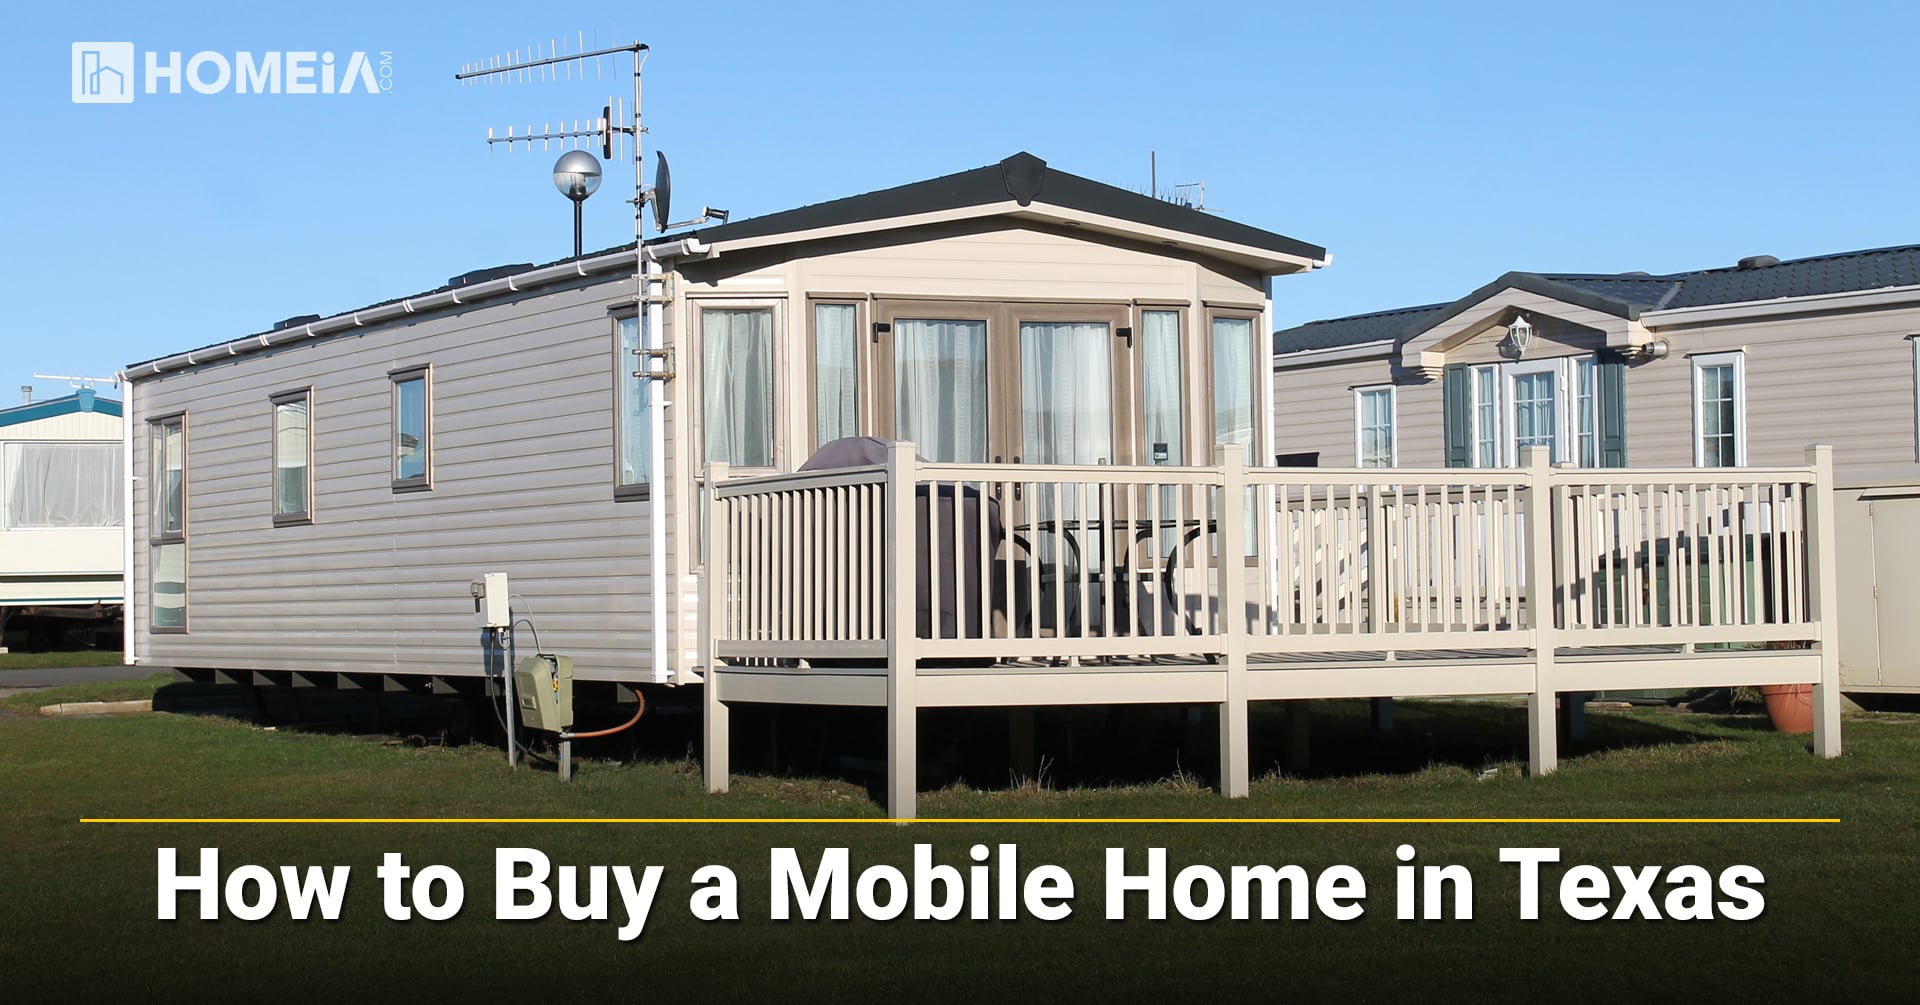 8 Key Steps to Buy a Mobile Home in Texas | HOMEiA